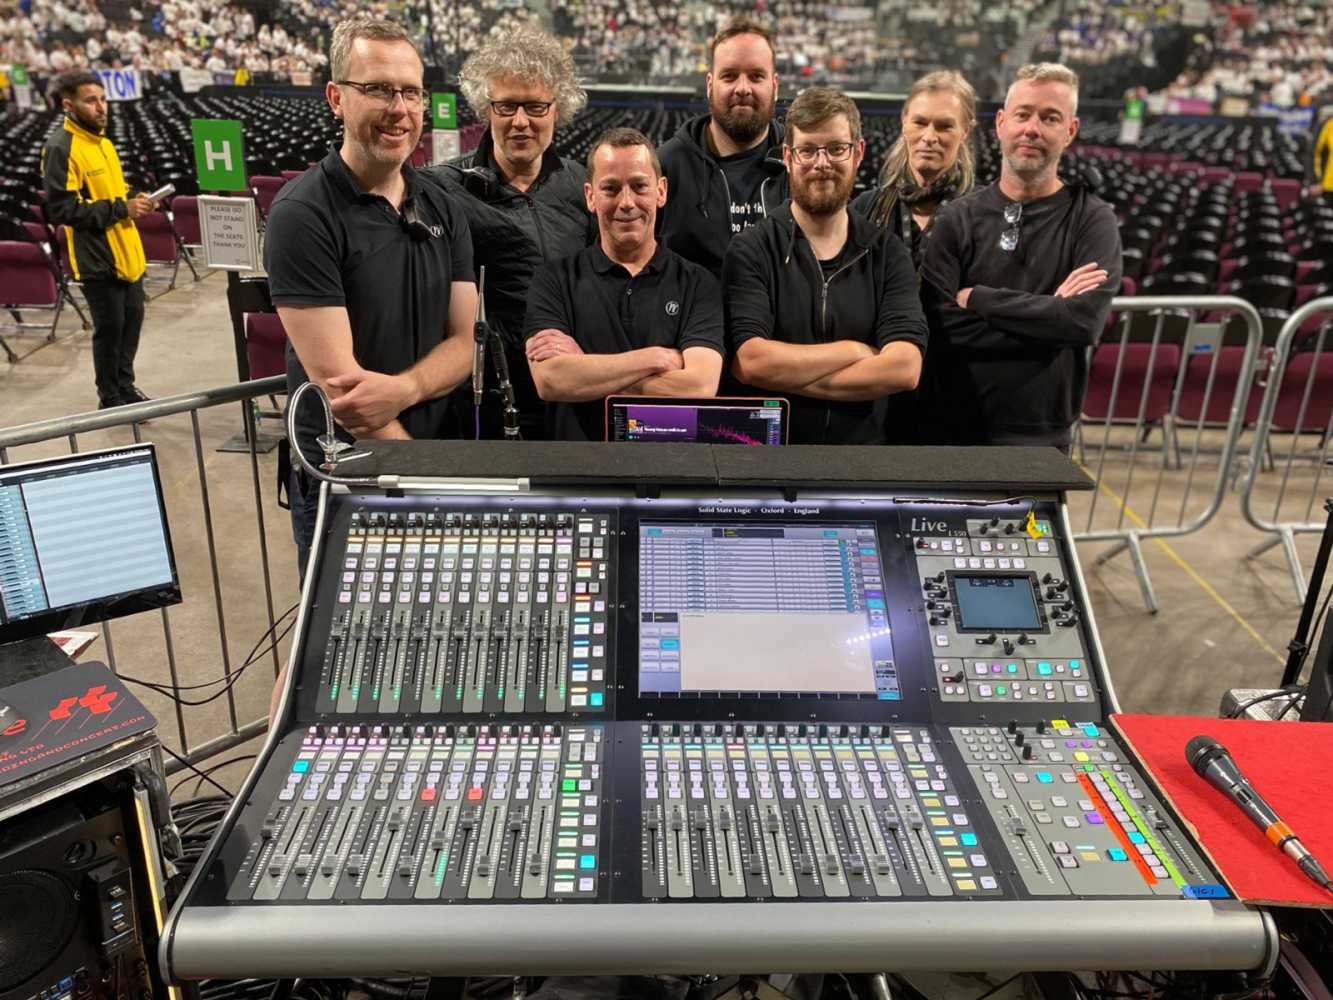 The Young Voices audio crew - Fergus Mount (crew chief), Gavin Tempany (FOH engineer), Luke Cohen (stage technician), Bart de Wit (system engineer), Tobias Dracup (RF technician), Grace Howat (monitor engineer) and Paul Gardiner (system engineer)